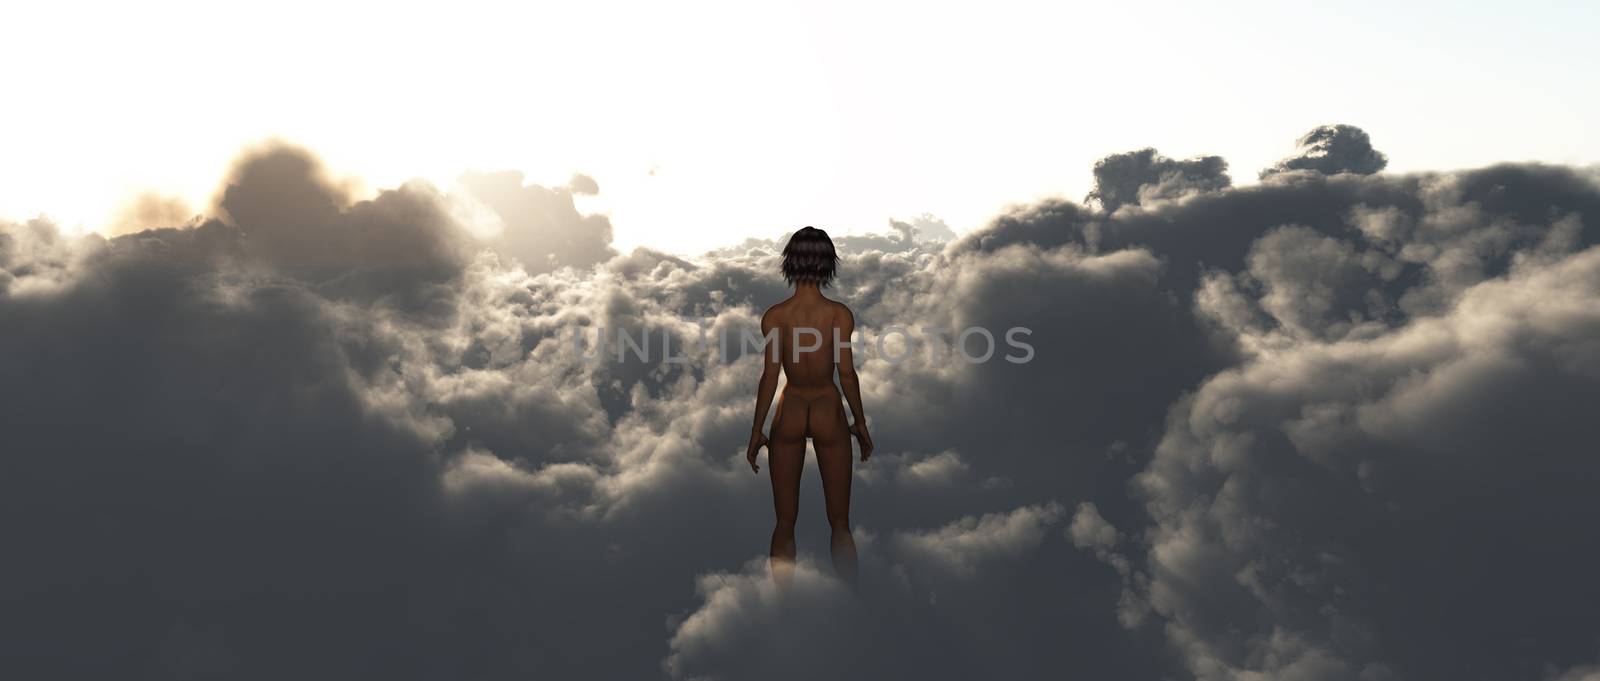 Woman in clouds by applesstock